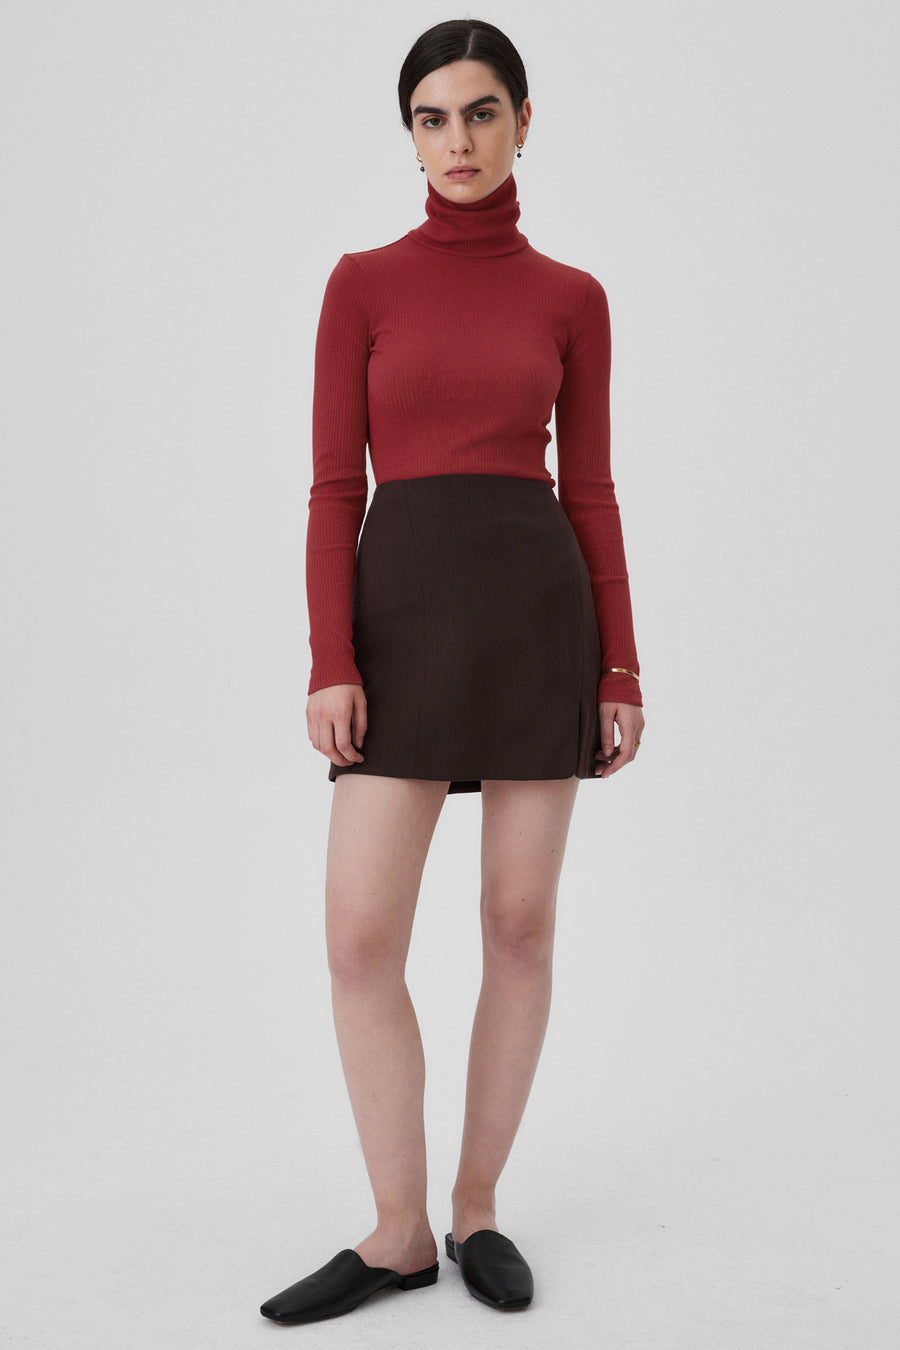 Turtleneck in organic cotton / 15 / 02 / goji red *tencel-skirt-07-02-dark-chocolate* ?The model is 176cm tall and wears size S?